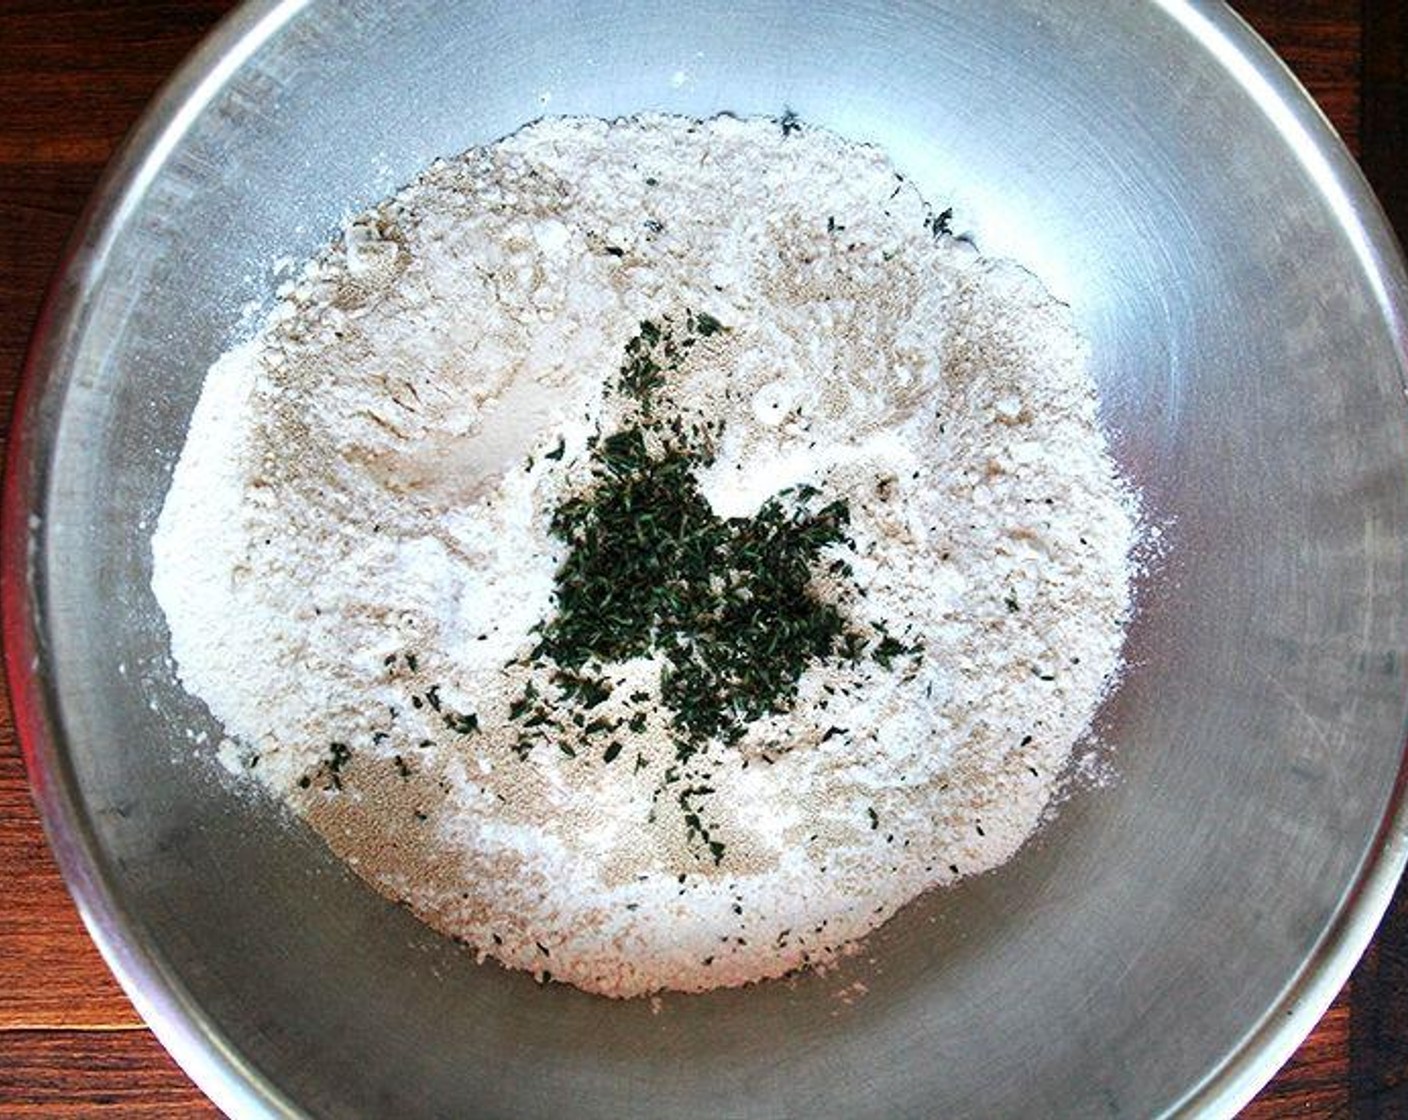 step 1 In a large mixing bowl, whisk together the All-Purpose Flour (4 cups), Kosher Salt (1/2 Tbsp), Granulated Sugar (1/2 Tbsp), Instant Dry Yeast (1/2 Tbsp), and Fresh Thyme Leaves (1 Tbsp).